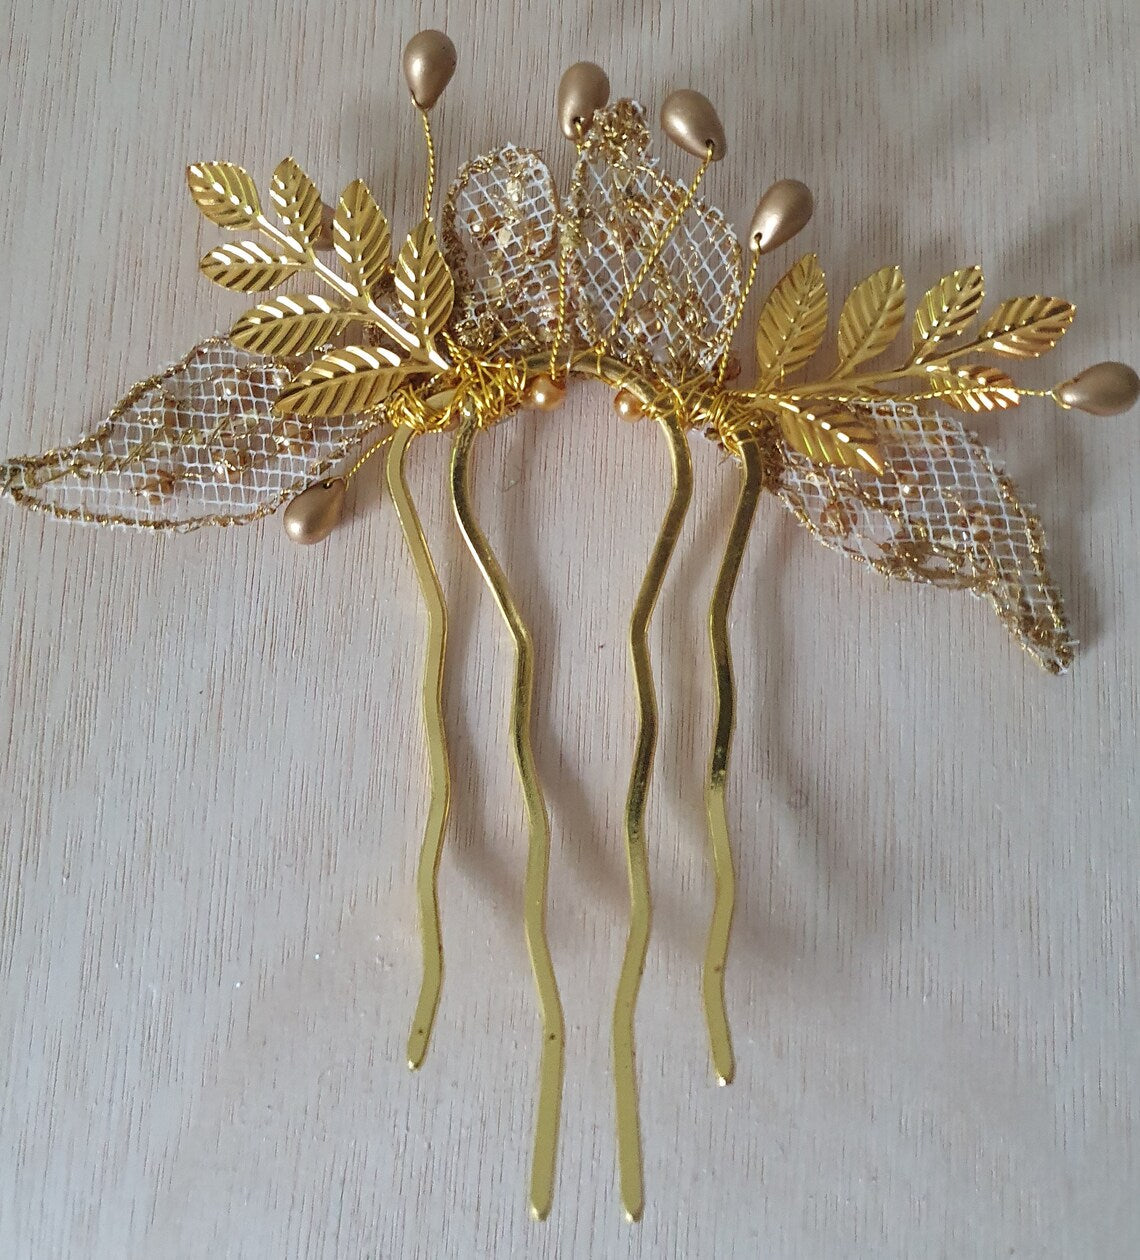 Handmade gold-colored bridal comb with pearls and drop stones - Elegant Hair Accessory for Weddings and Parties, Metal Comb